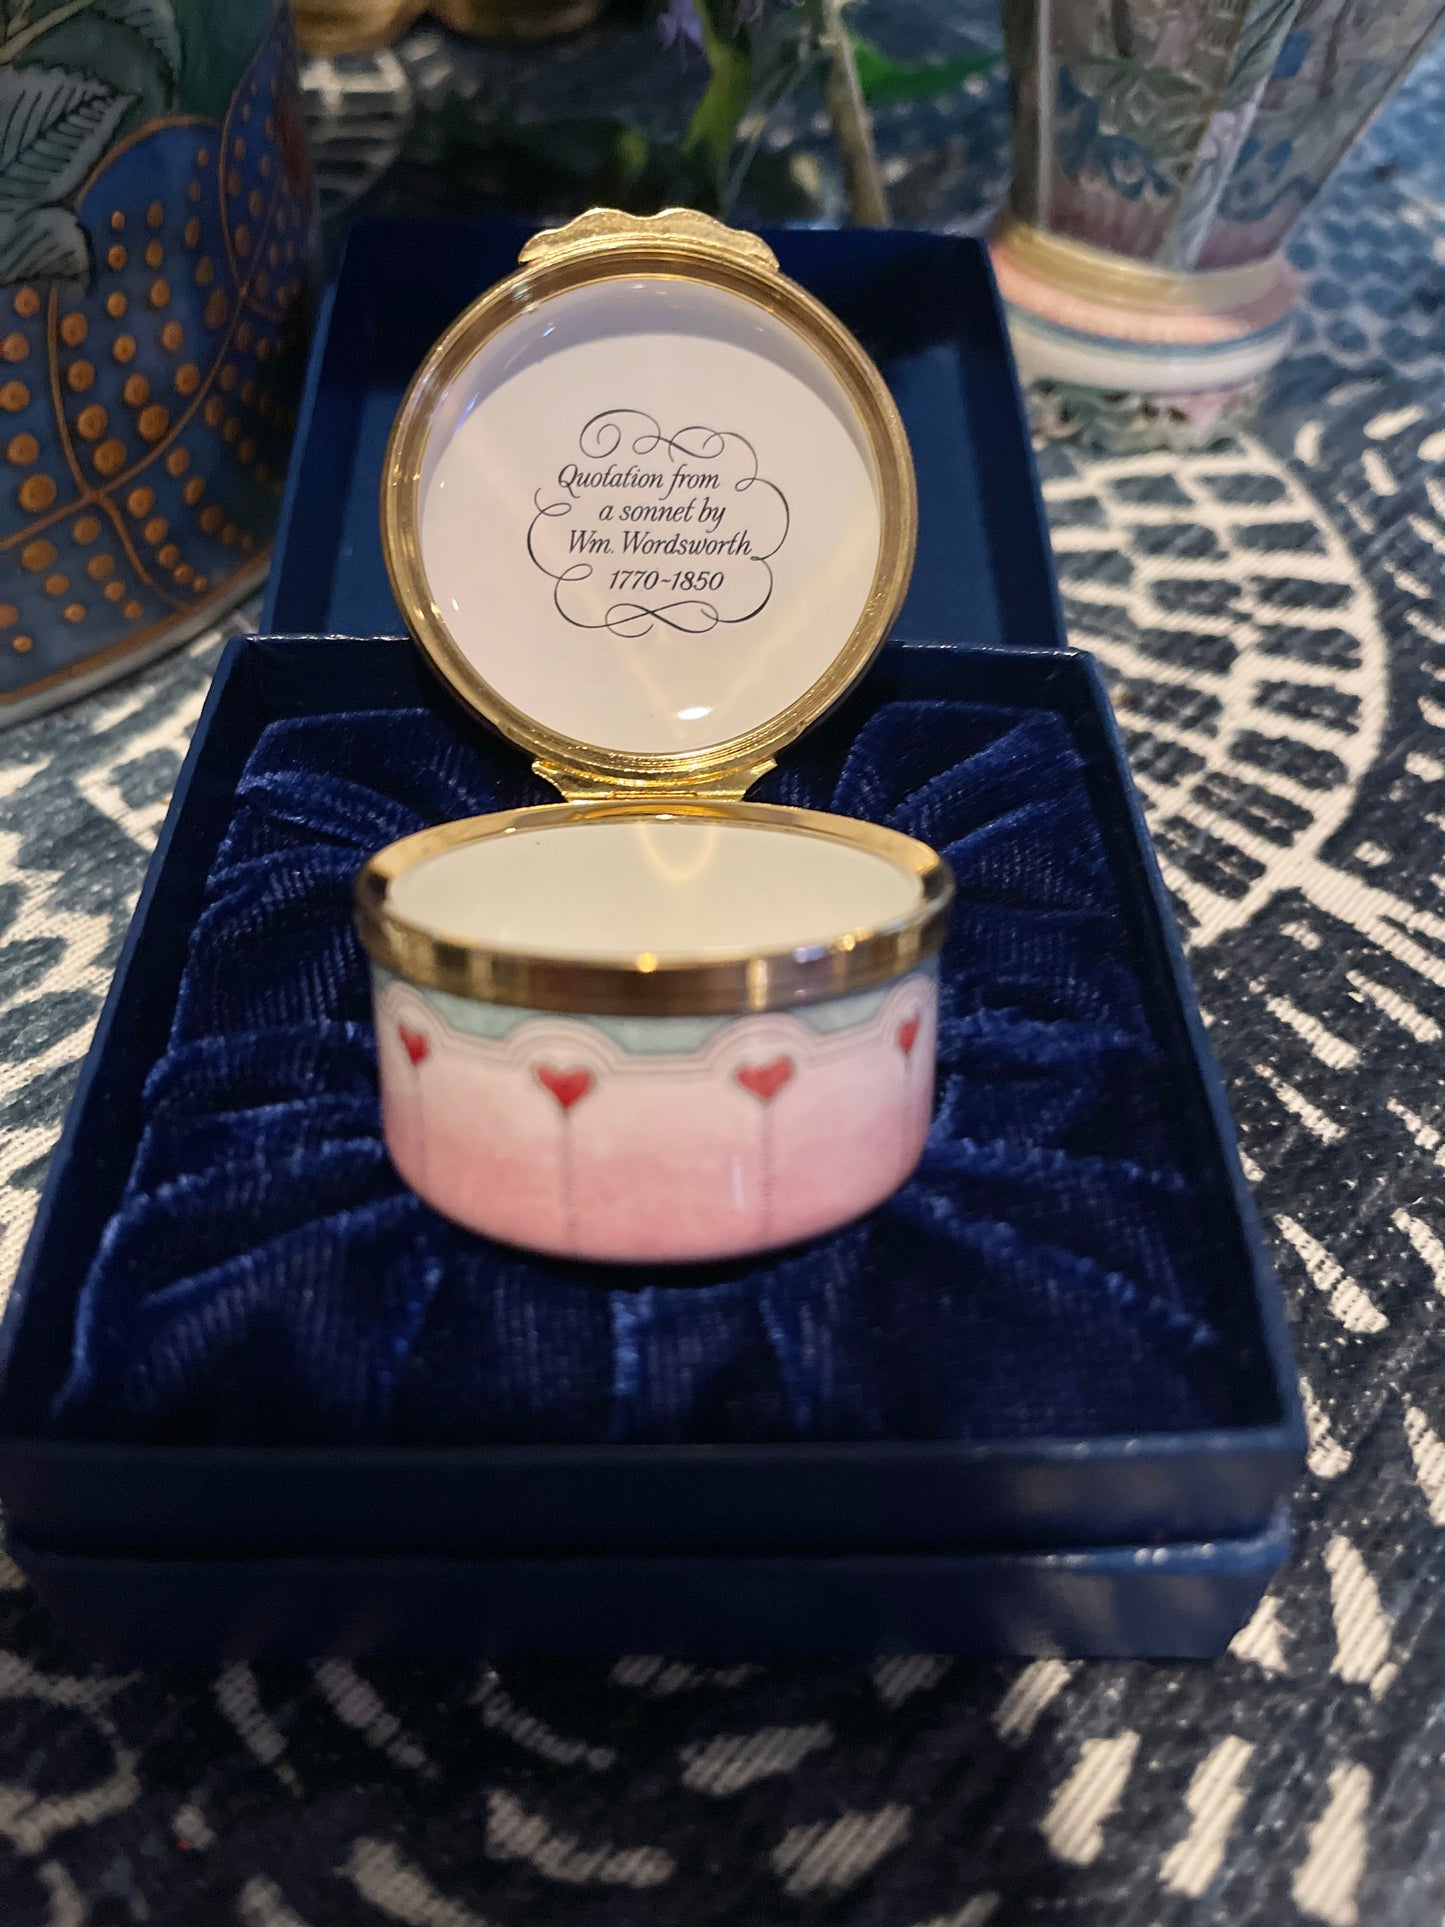 Halcyon Days Pink Enamel Box, Love Betters What is Best, Williams Wordsworth , Heart Detail